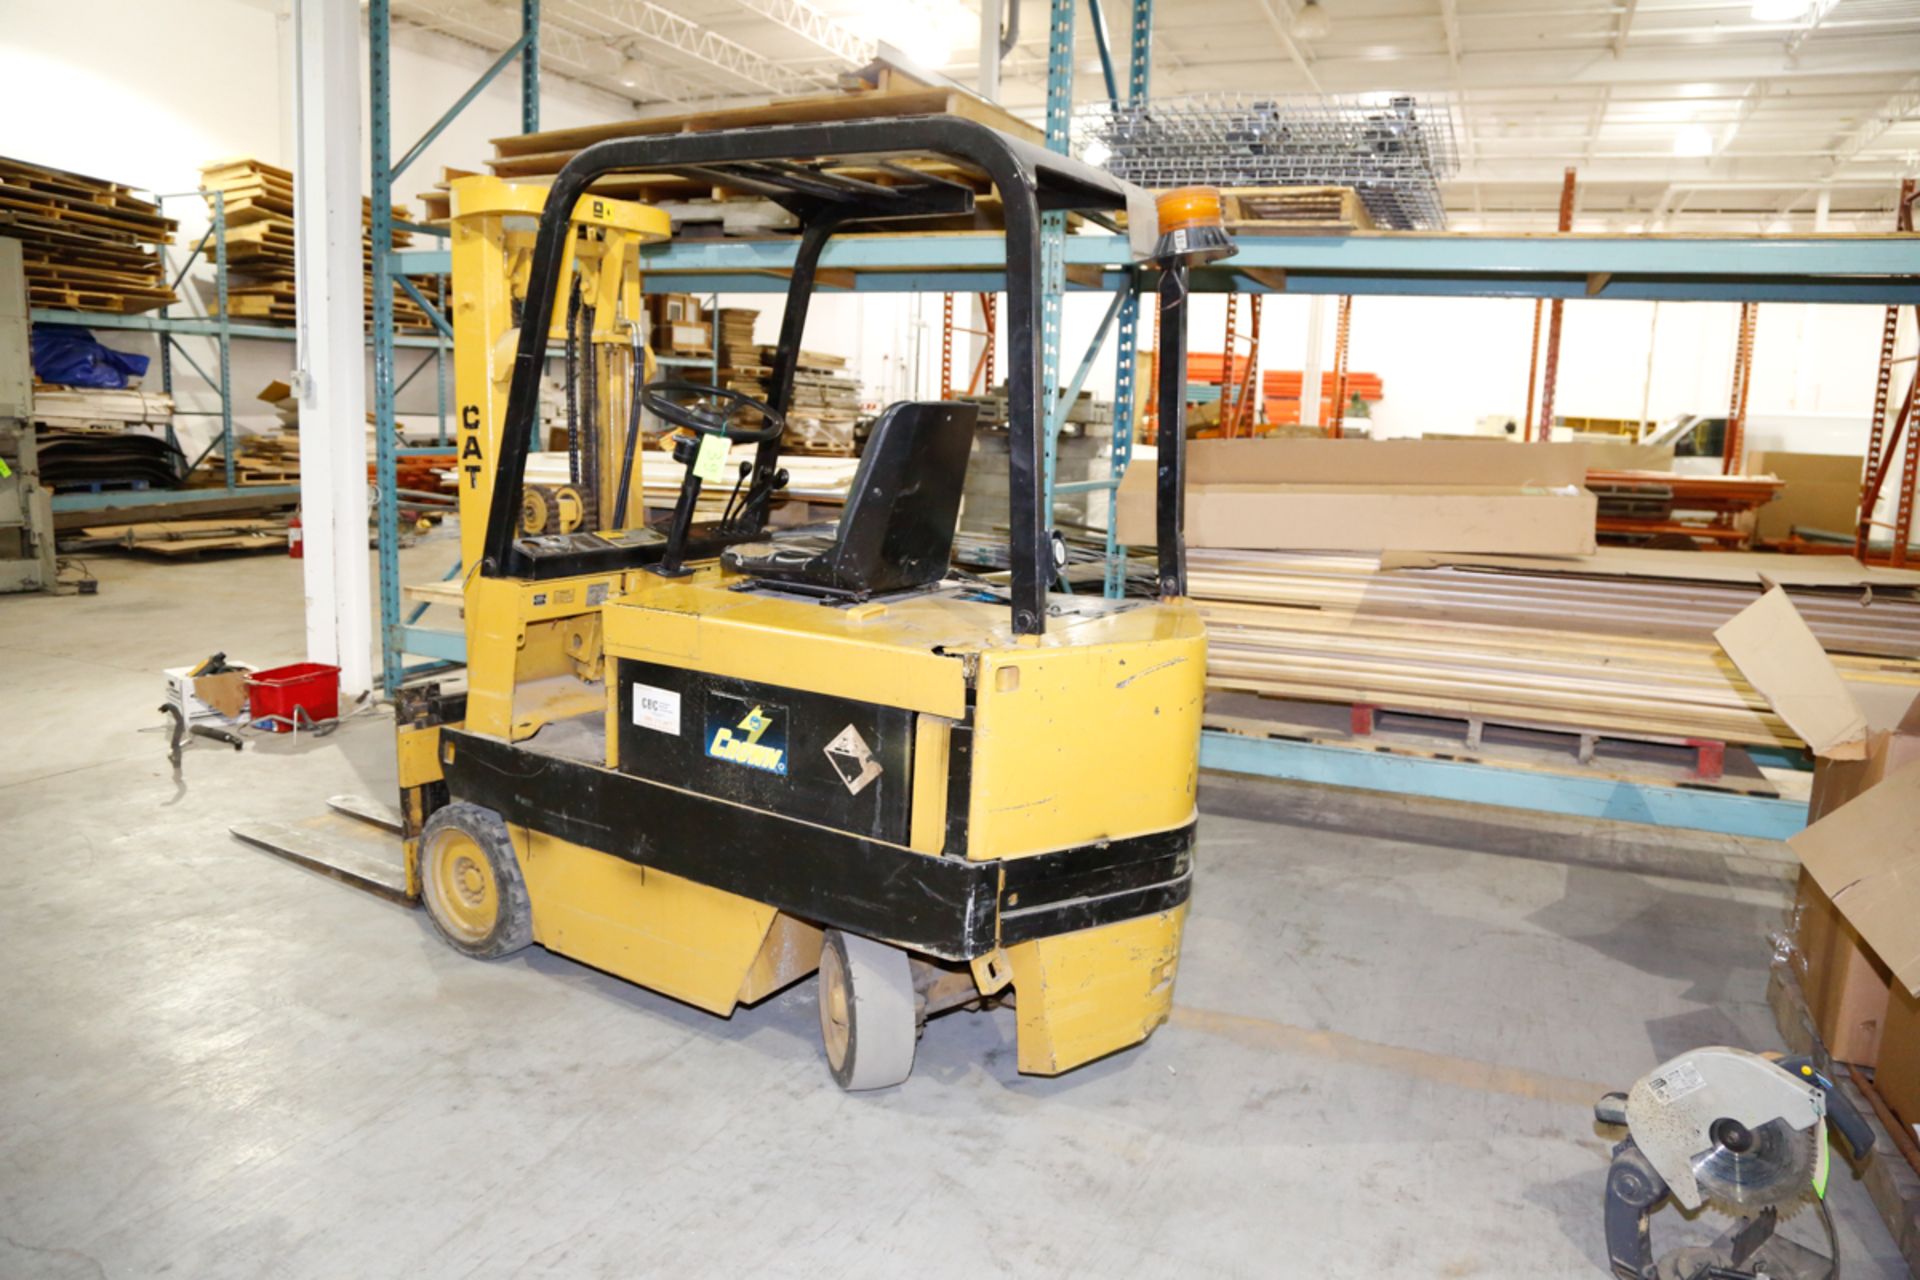 CATERPILLAR ELECTRIC FORKLIFT MOD MC60B, 6350 LBS CAP., 124" LIFT HEIGHT, 2-STAGE, SIDESHIFT, 7420 - Image 4 of 4